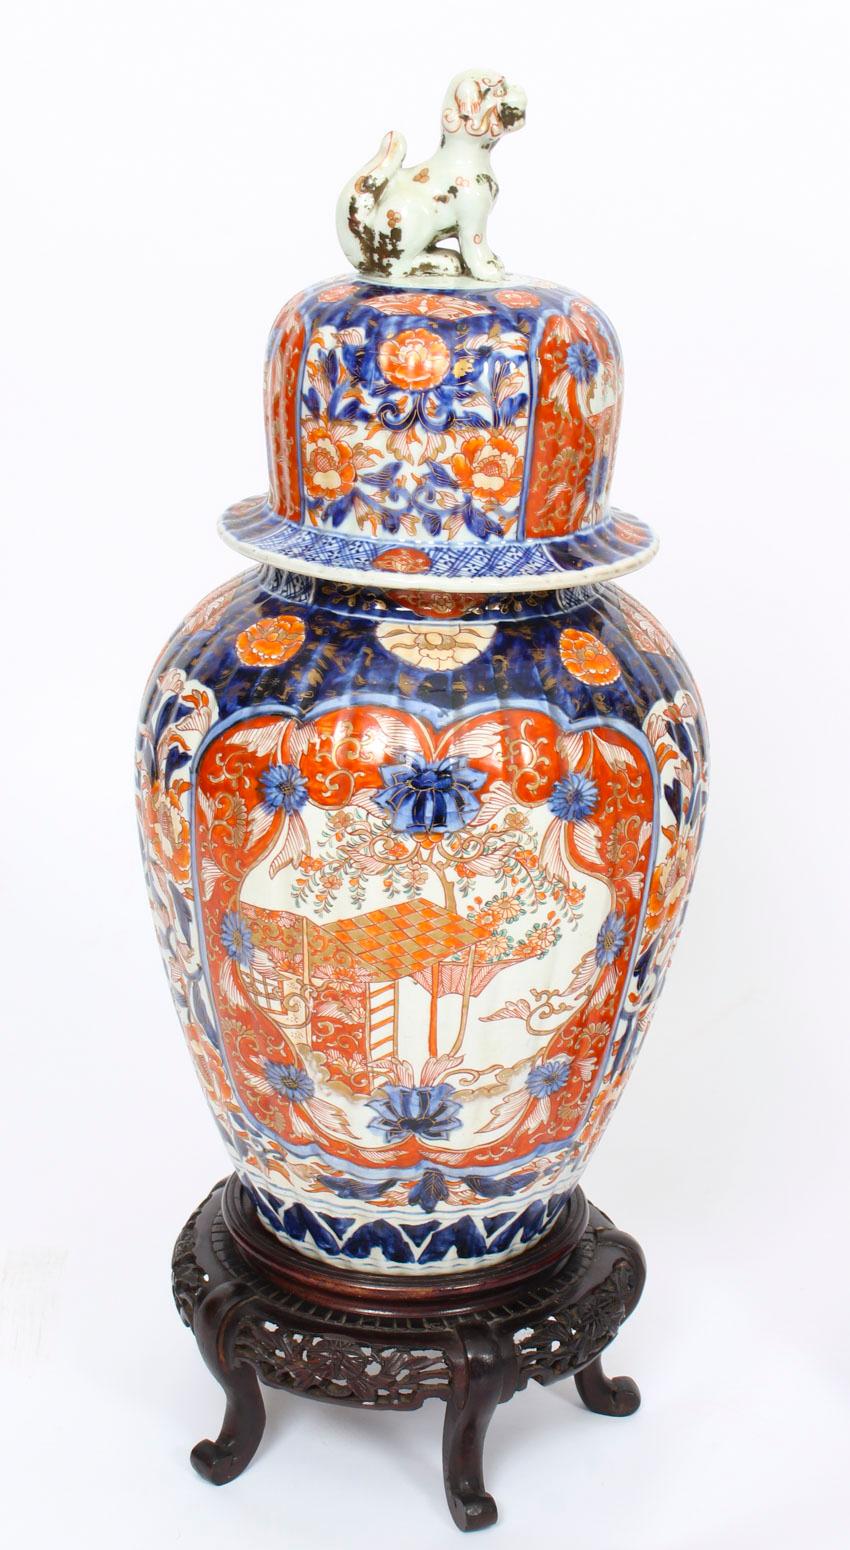 This is a large pair of Japanese Imari jars with covers on stands, circa 1870 in date.

The vases are of elegant bulbous shape with vertically inverted reeding and have domed covers which are surmounted by attractive foo dogs.

The pair of vases